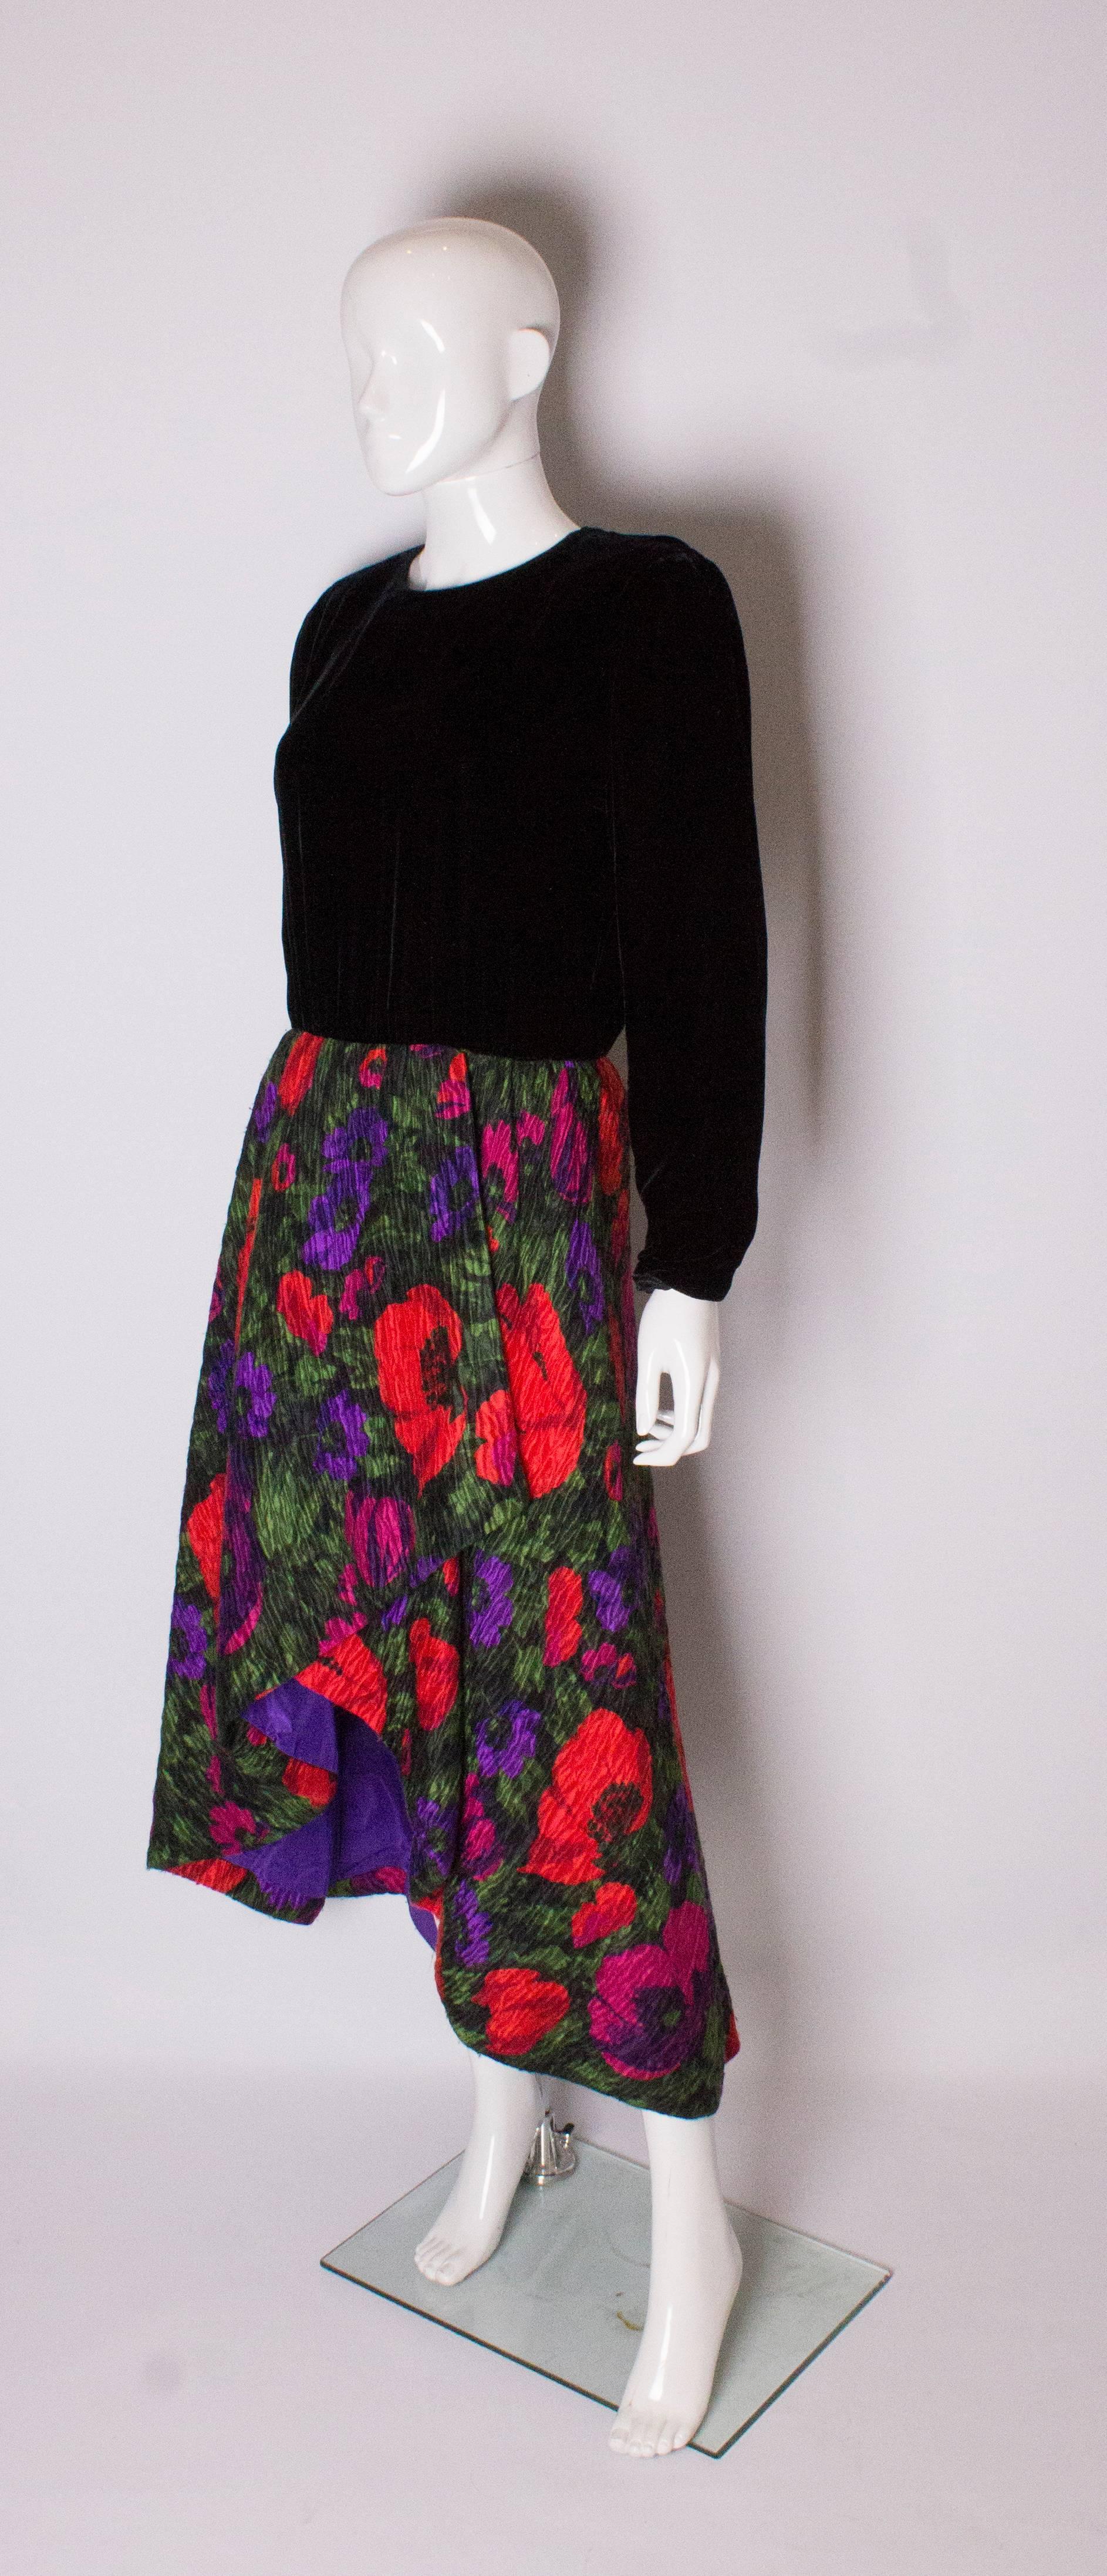 A chic evening dress by Akris. The dress has a black velvet body with a 5 button opening at the back. The the skirt is in a floral textured fabric , with purple lining, foldover at the front and zip opening at the rear.